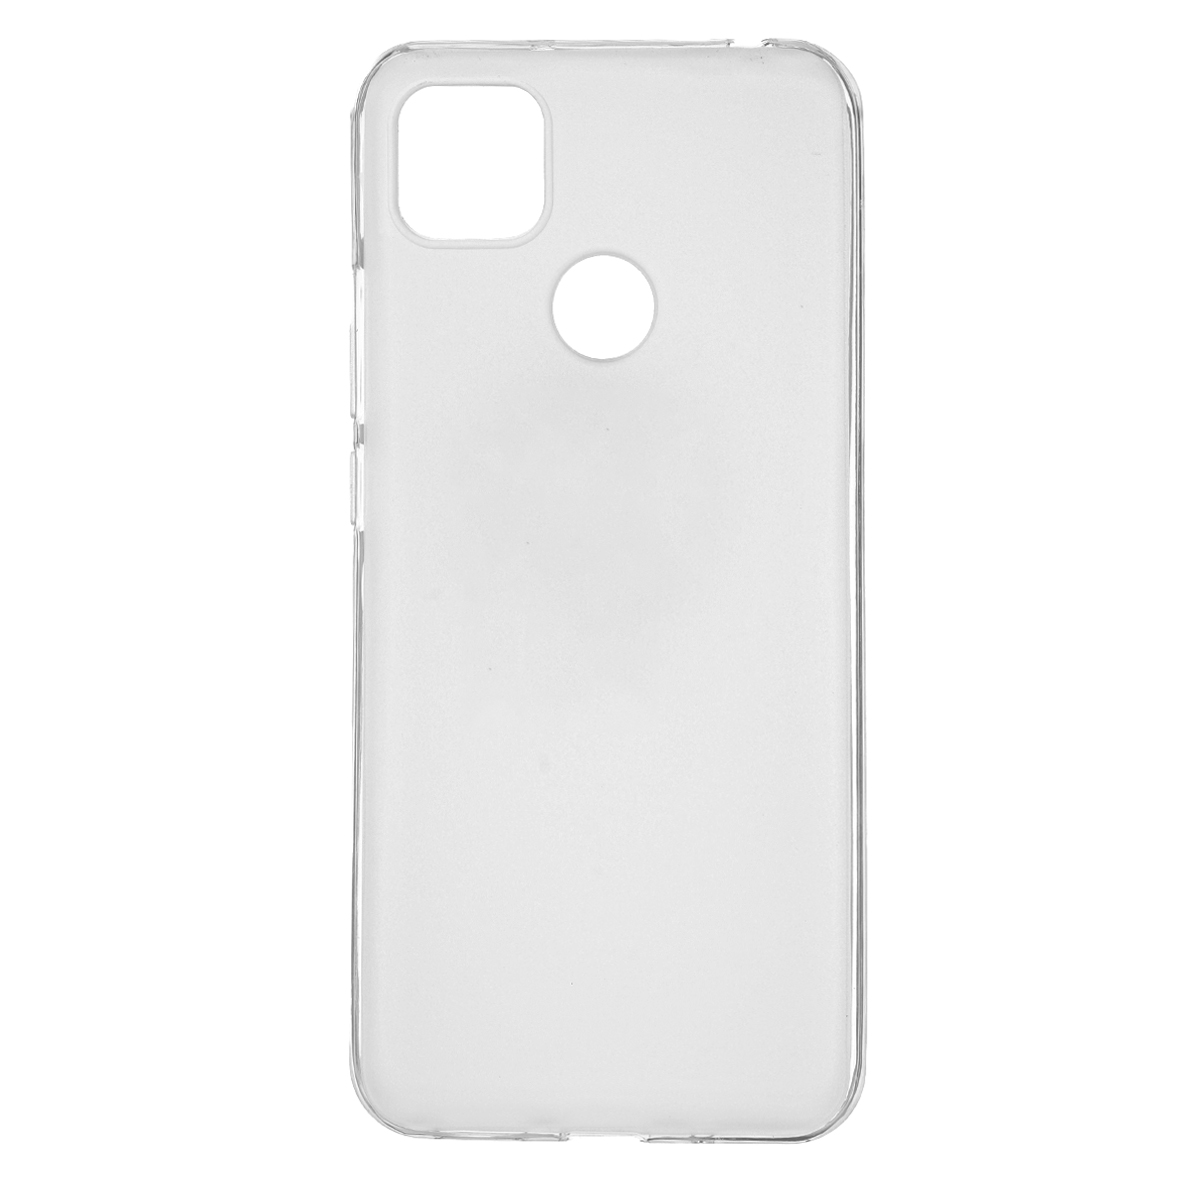 Bakeey-Pudding-Series-Frosted-Shockproof-Ultra-Thin-Non-Yellow-Anti-Fingerprint-Soft-TPU-Protective--1735438-9